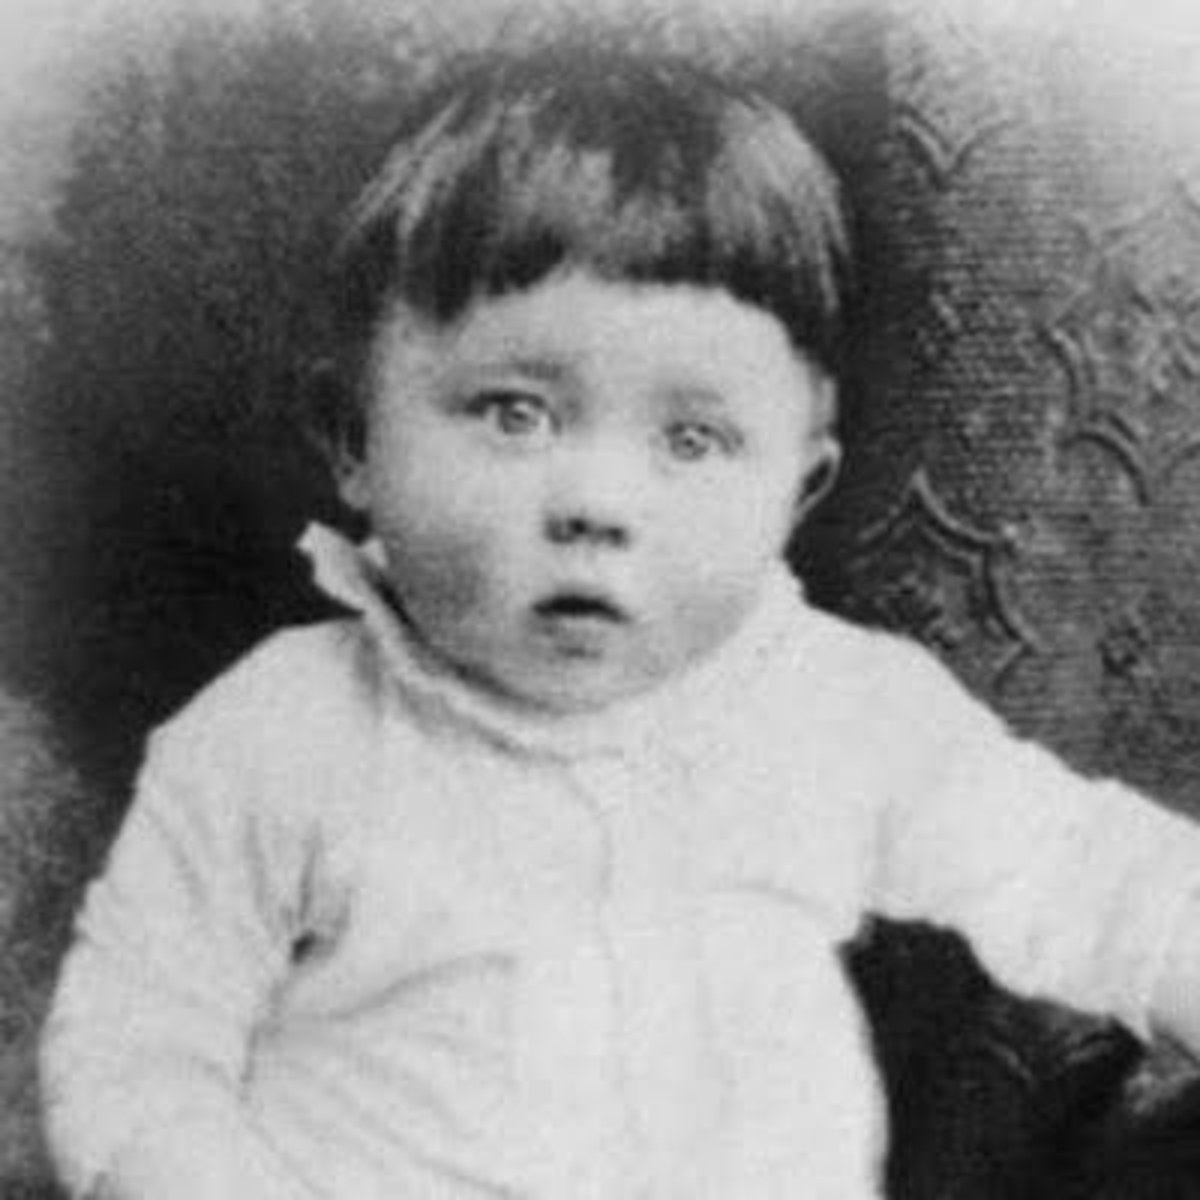 Adolf Hitler looked so innocent and pure